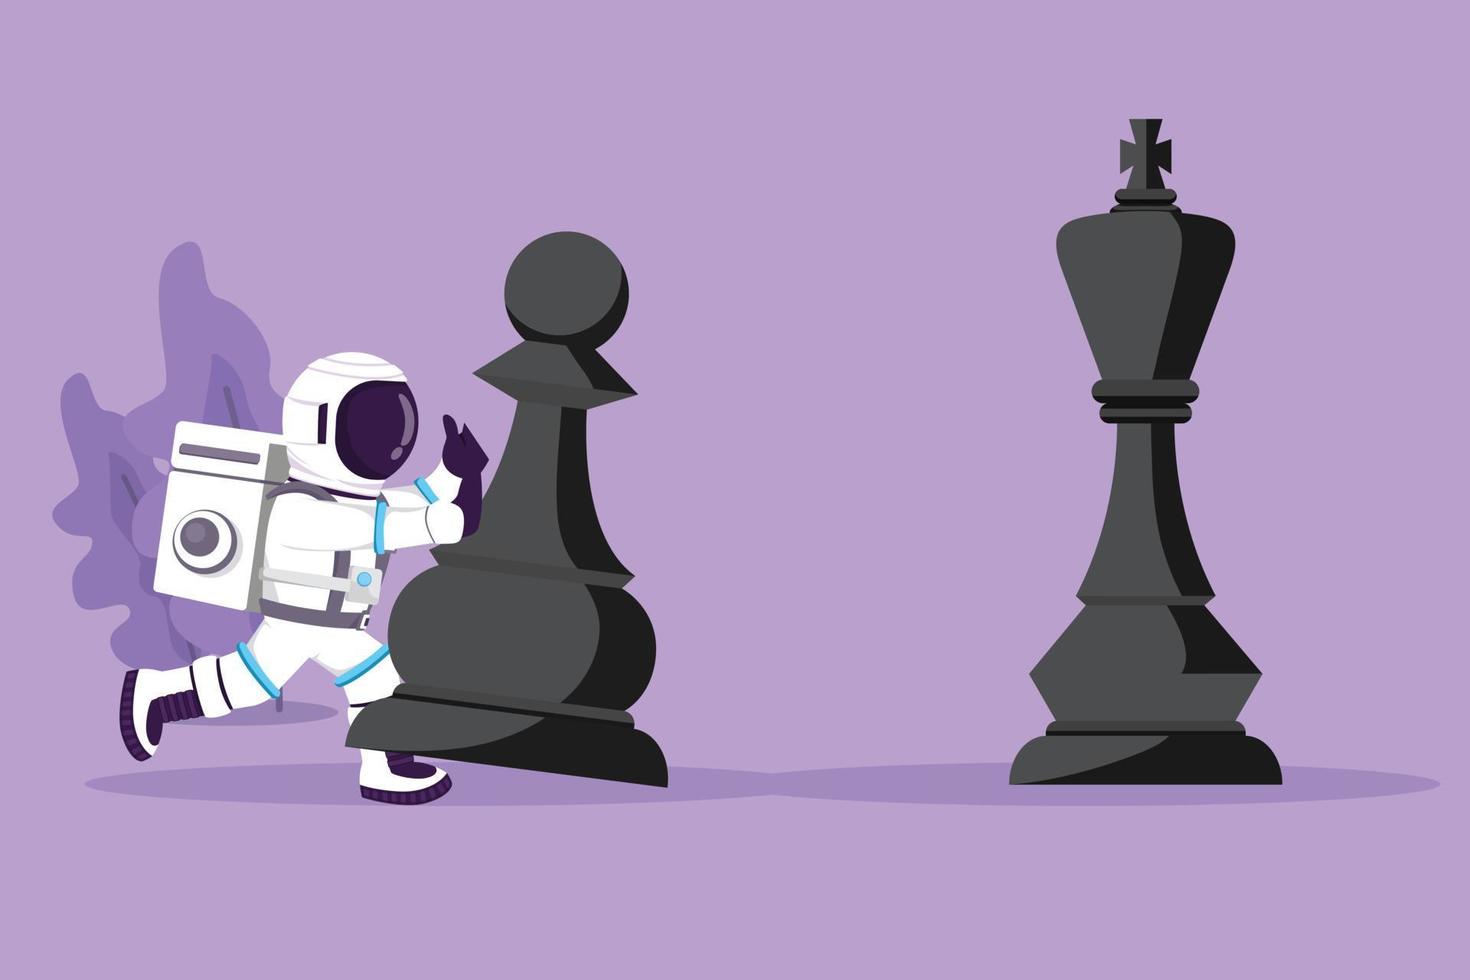 Graphic flat design drawing young astronaut push huge pawn chess piece to beat king in moon surface. Strategic move in win game play. Cosmonaut outer space concept. Cartoon style vector illustration